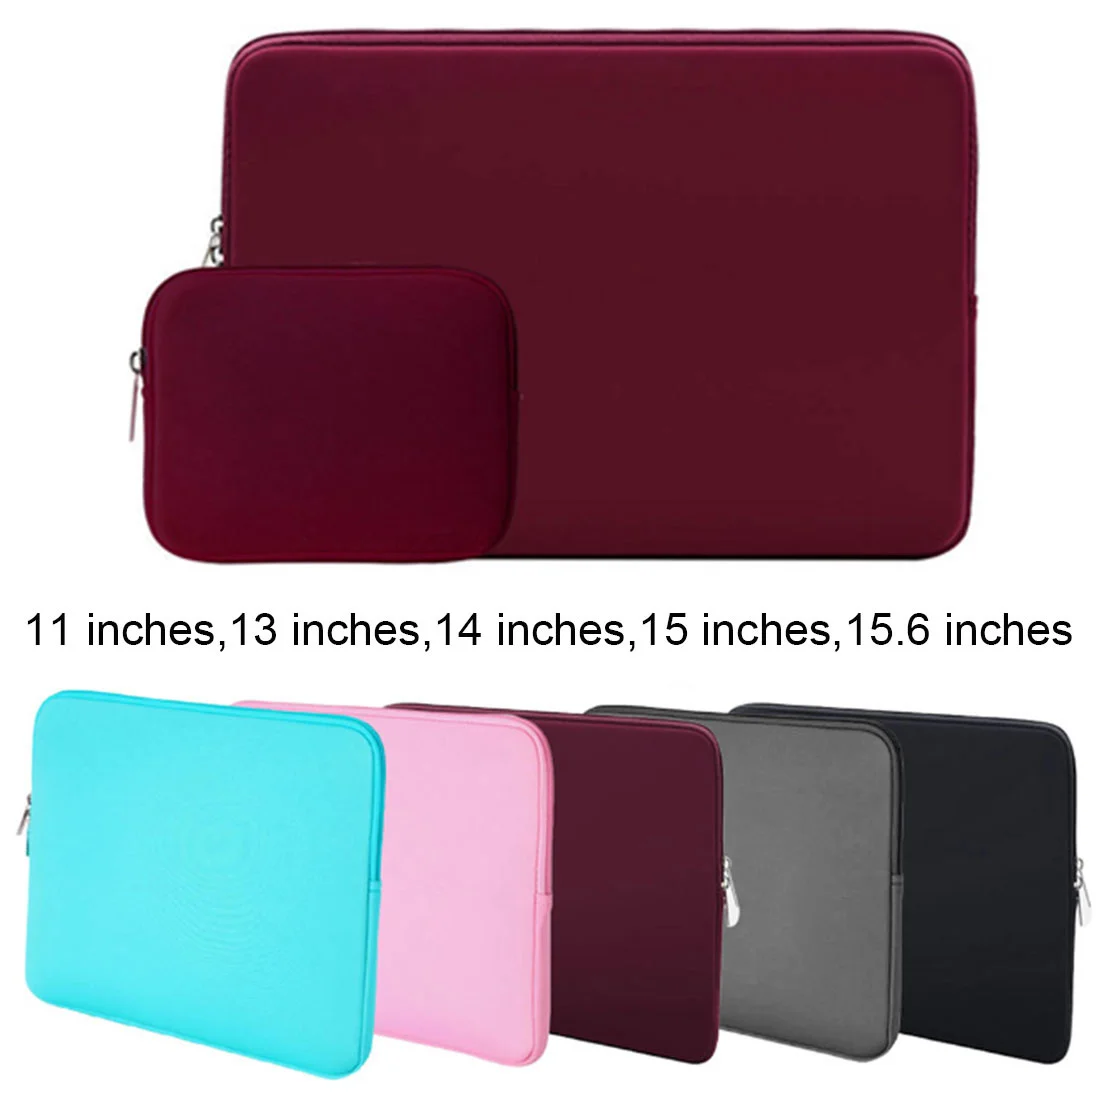 

Laptop Notebook Case 11" 13" 14" 15" 15.6" 14 Inch Tablet Sleeve Cover Bag For Xiaomi Huawei HP Dell Macbook Pro Air Retina